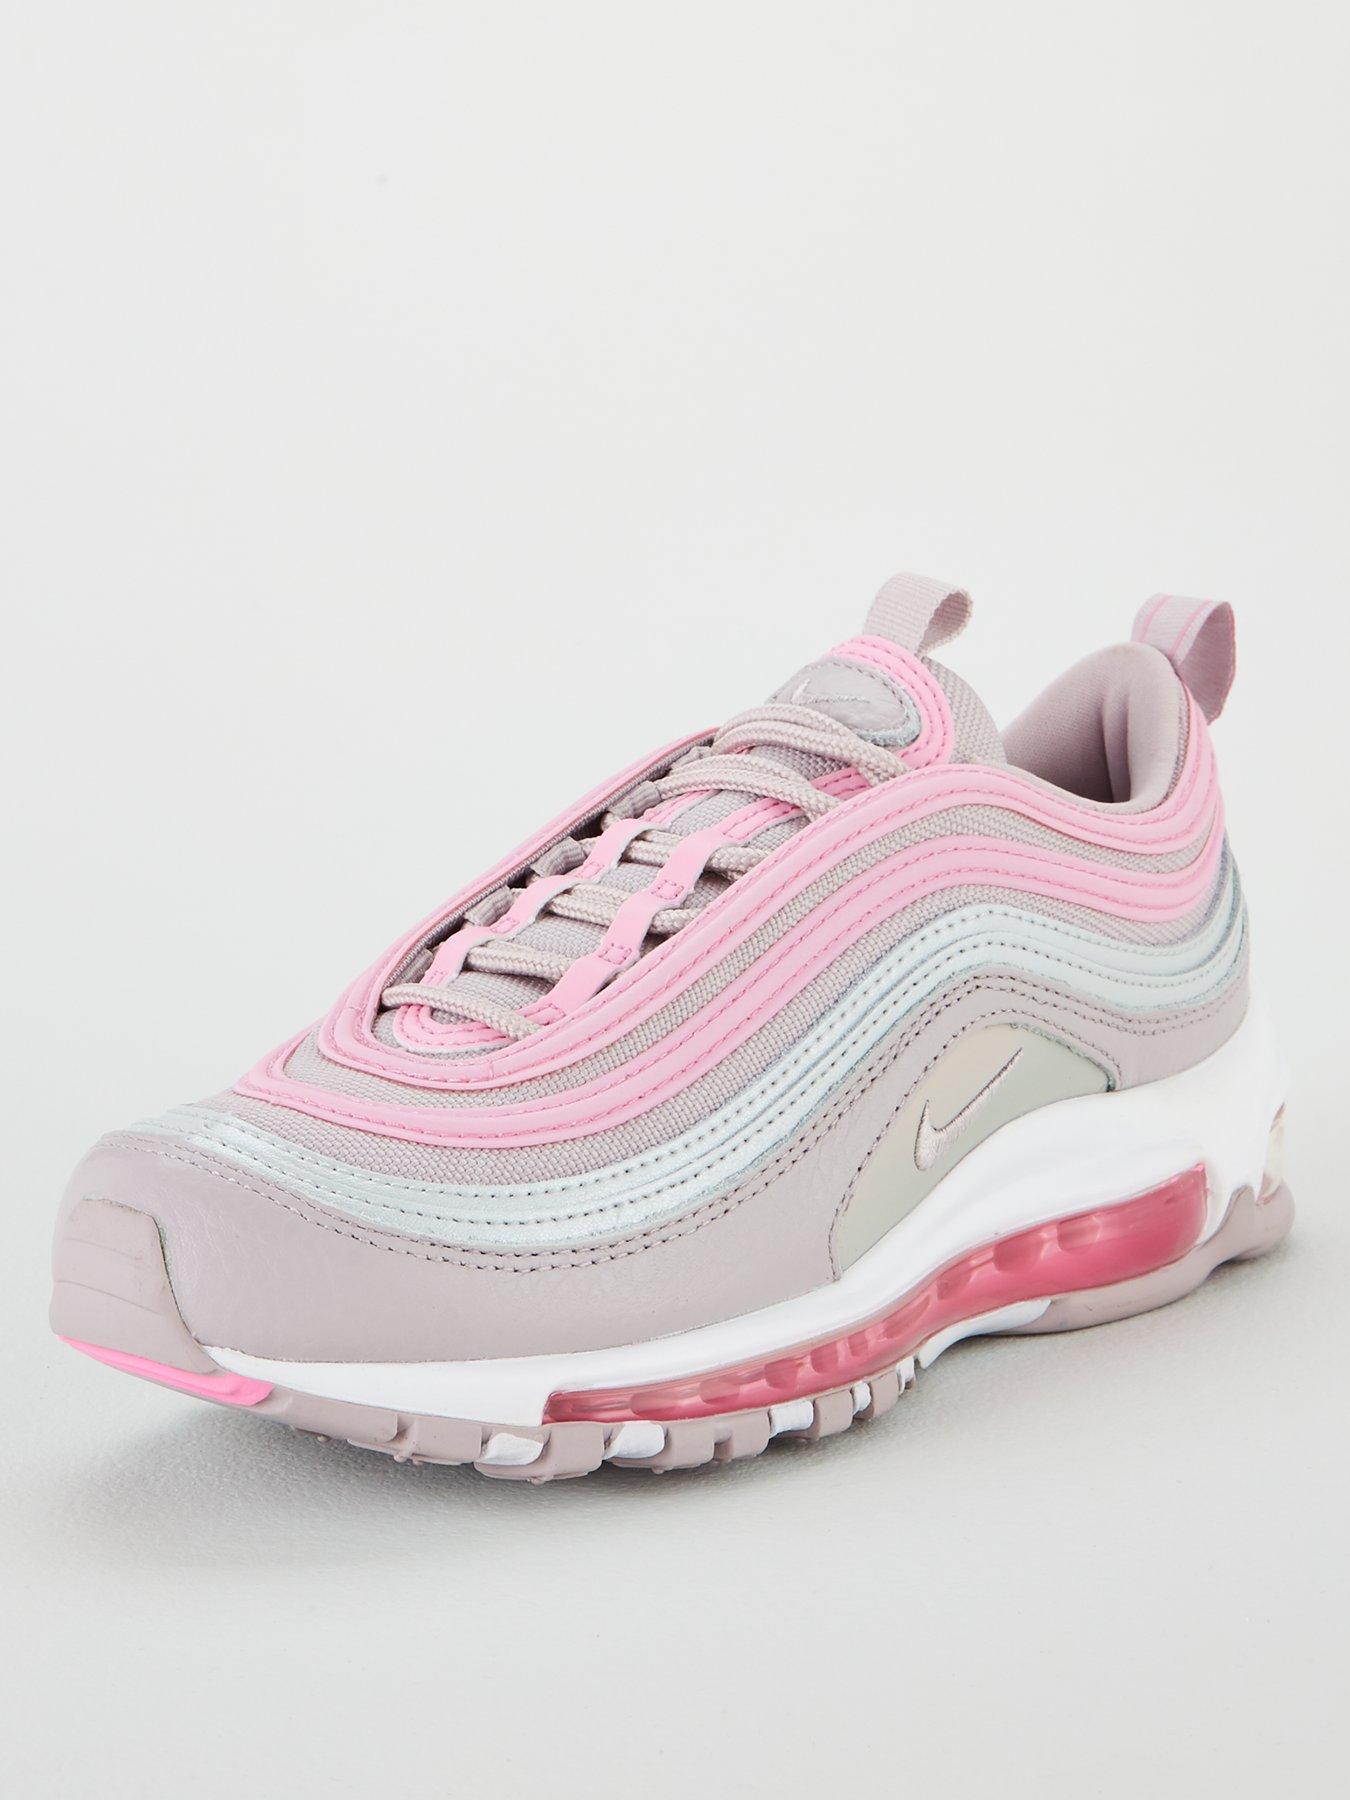 white and pink 97s Shop Clothing 